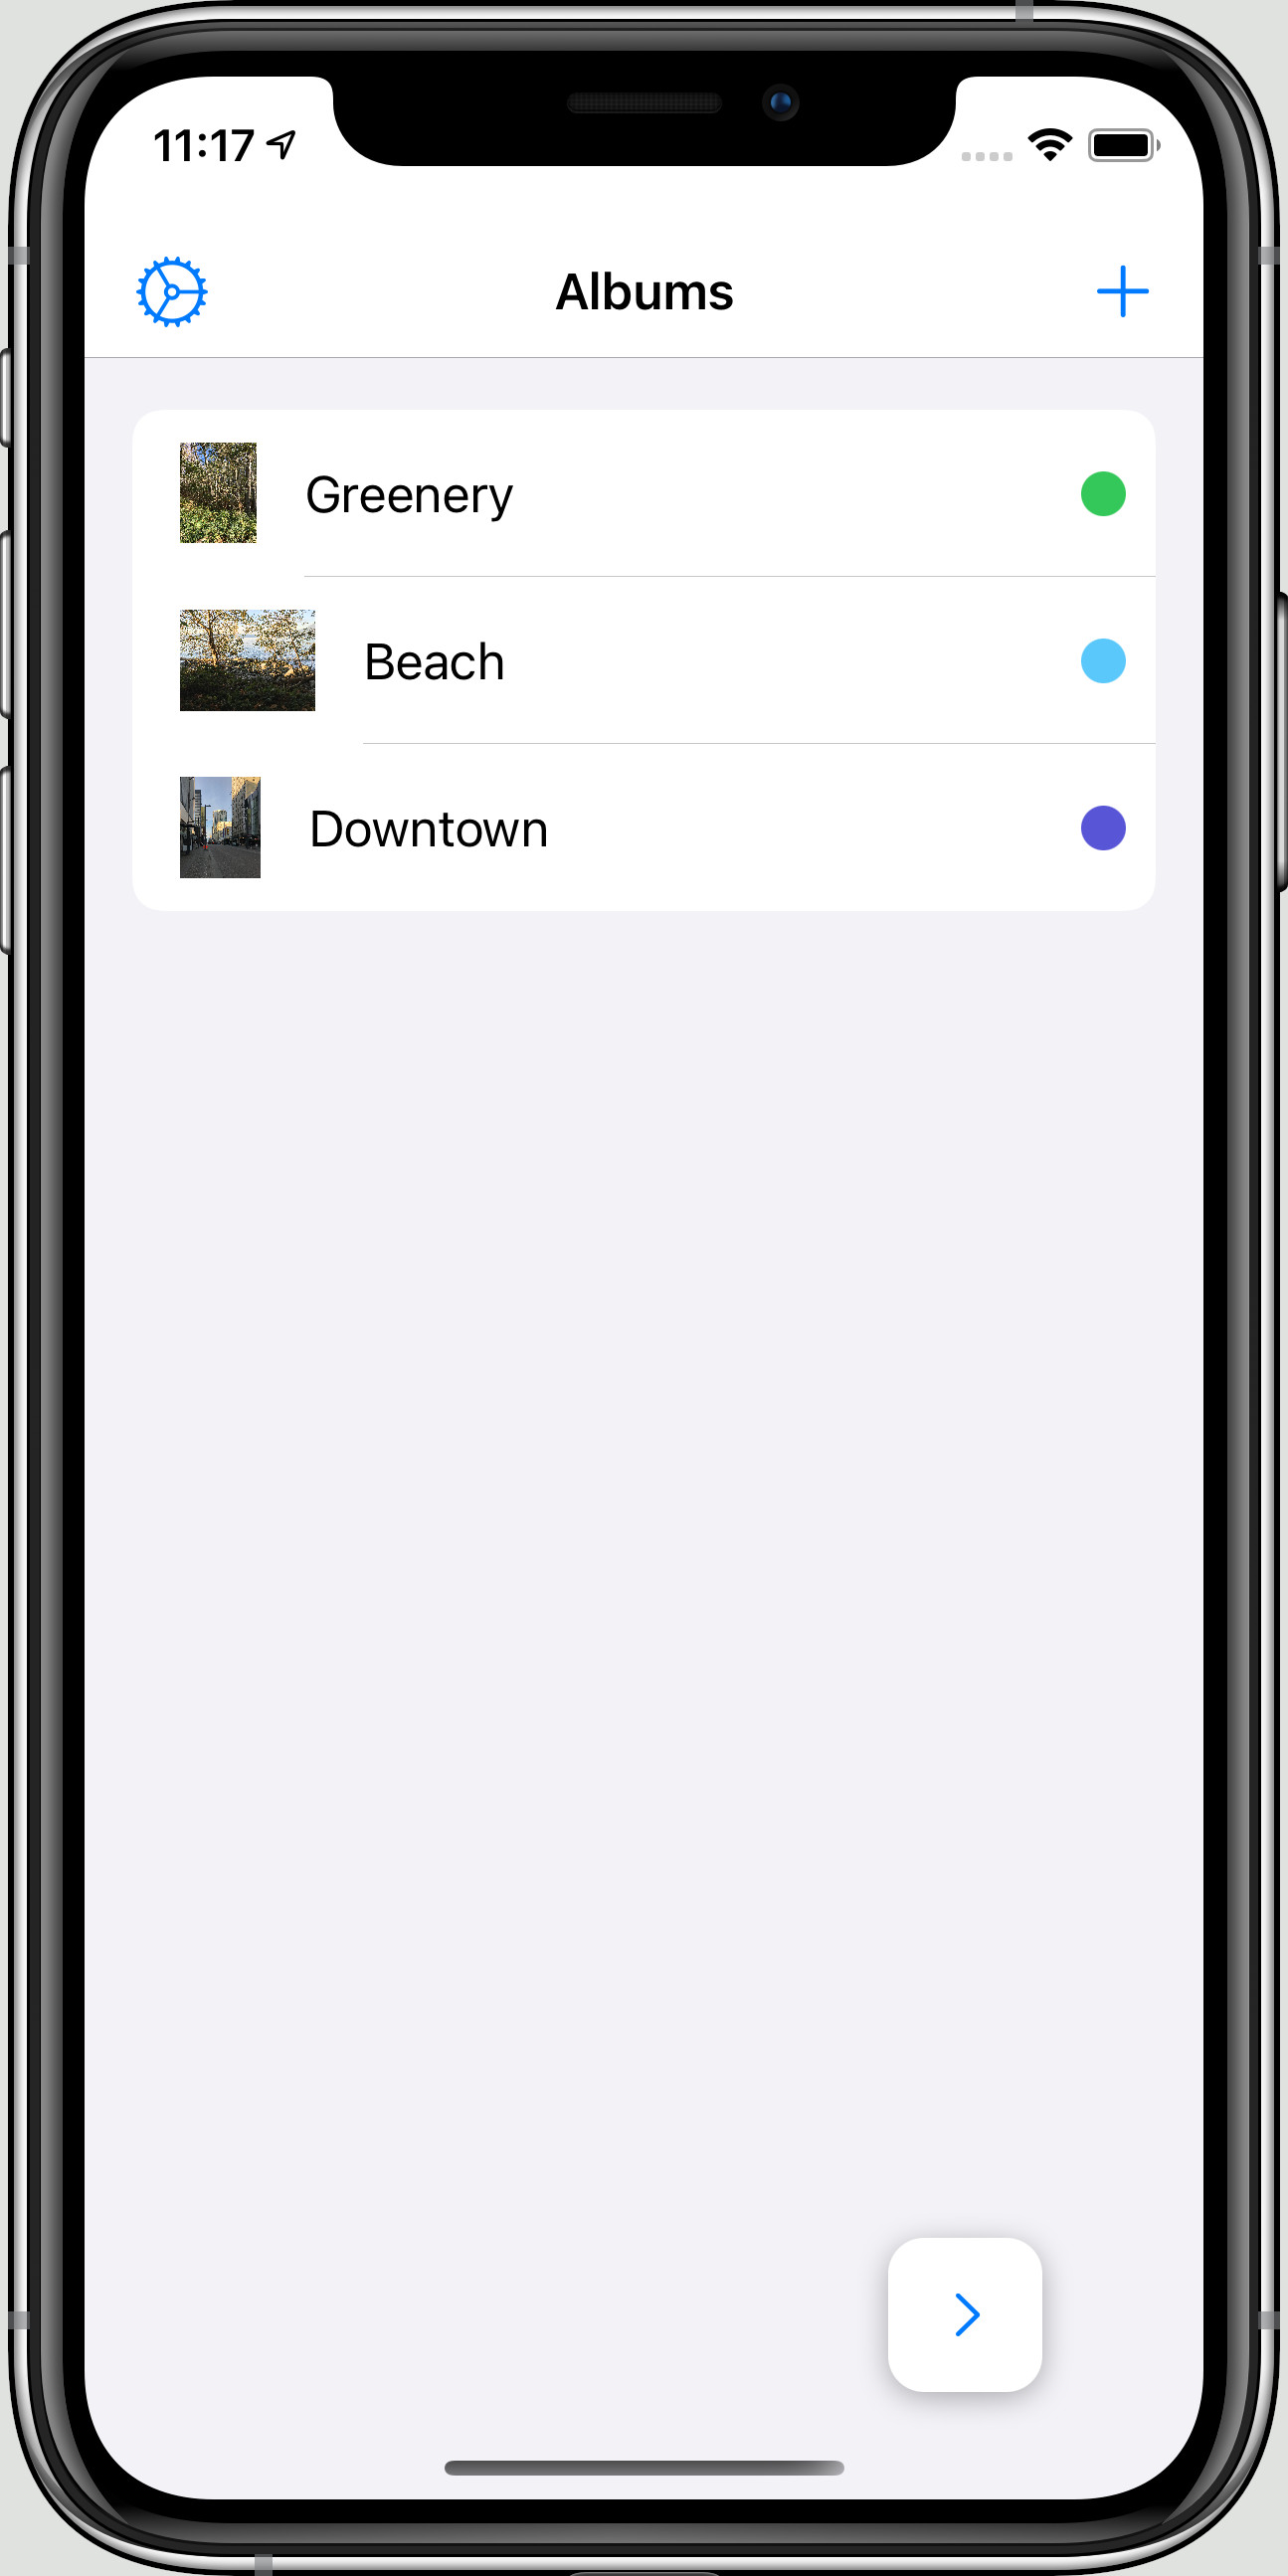 List of Location Camera photo albums displayed on an iPhone